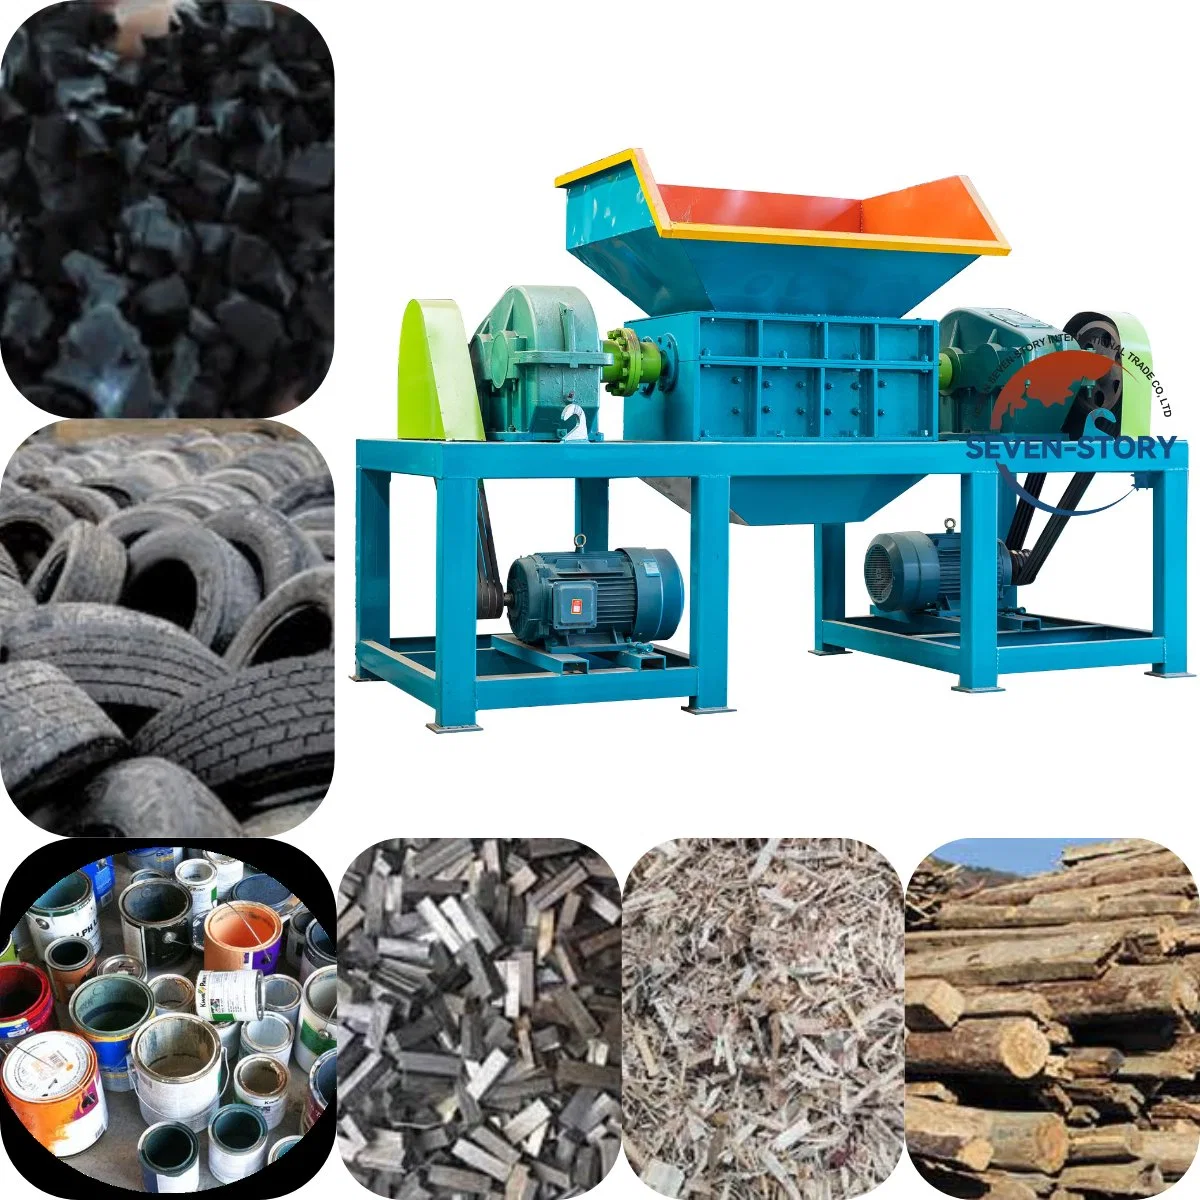 Innovative Plastic Recycling Machine for Domestic Plastic Containers